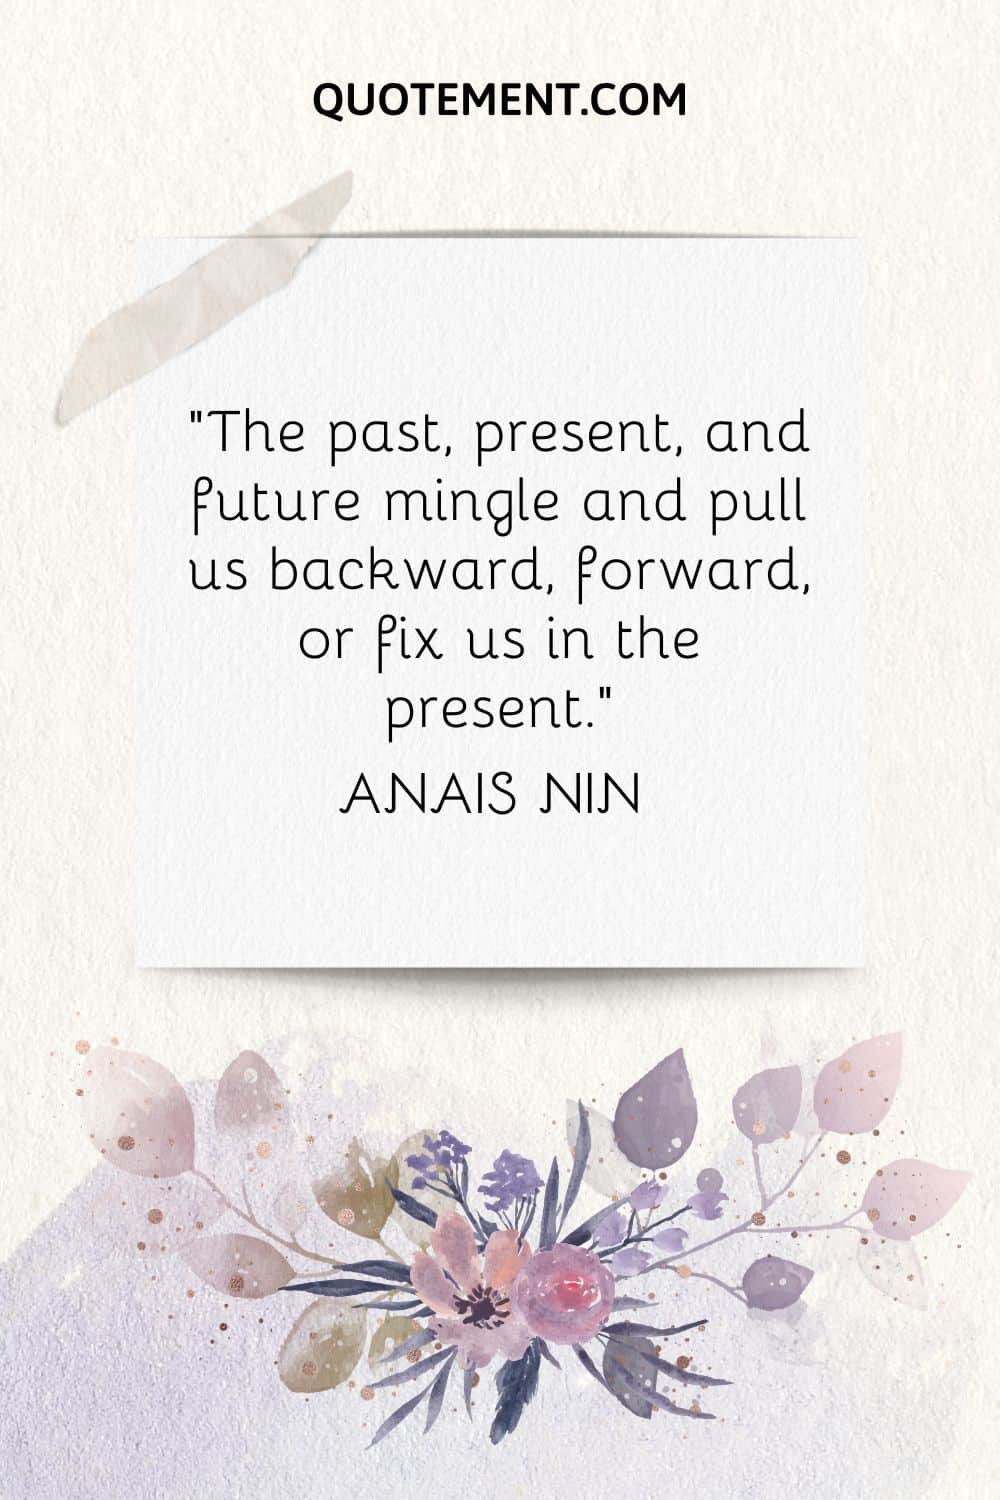 The past, present, and future mingle and pull us backward, forward, or fix us in the present. — Anais Nin